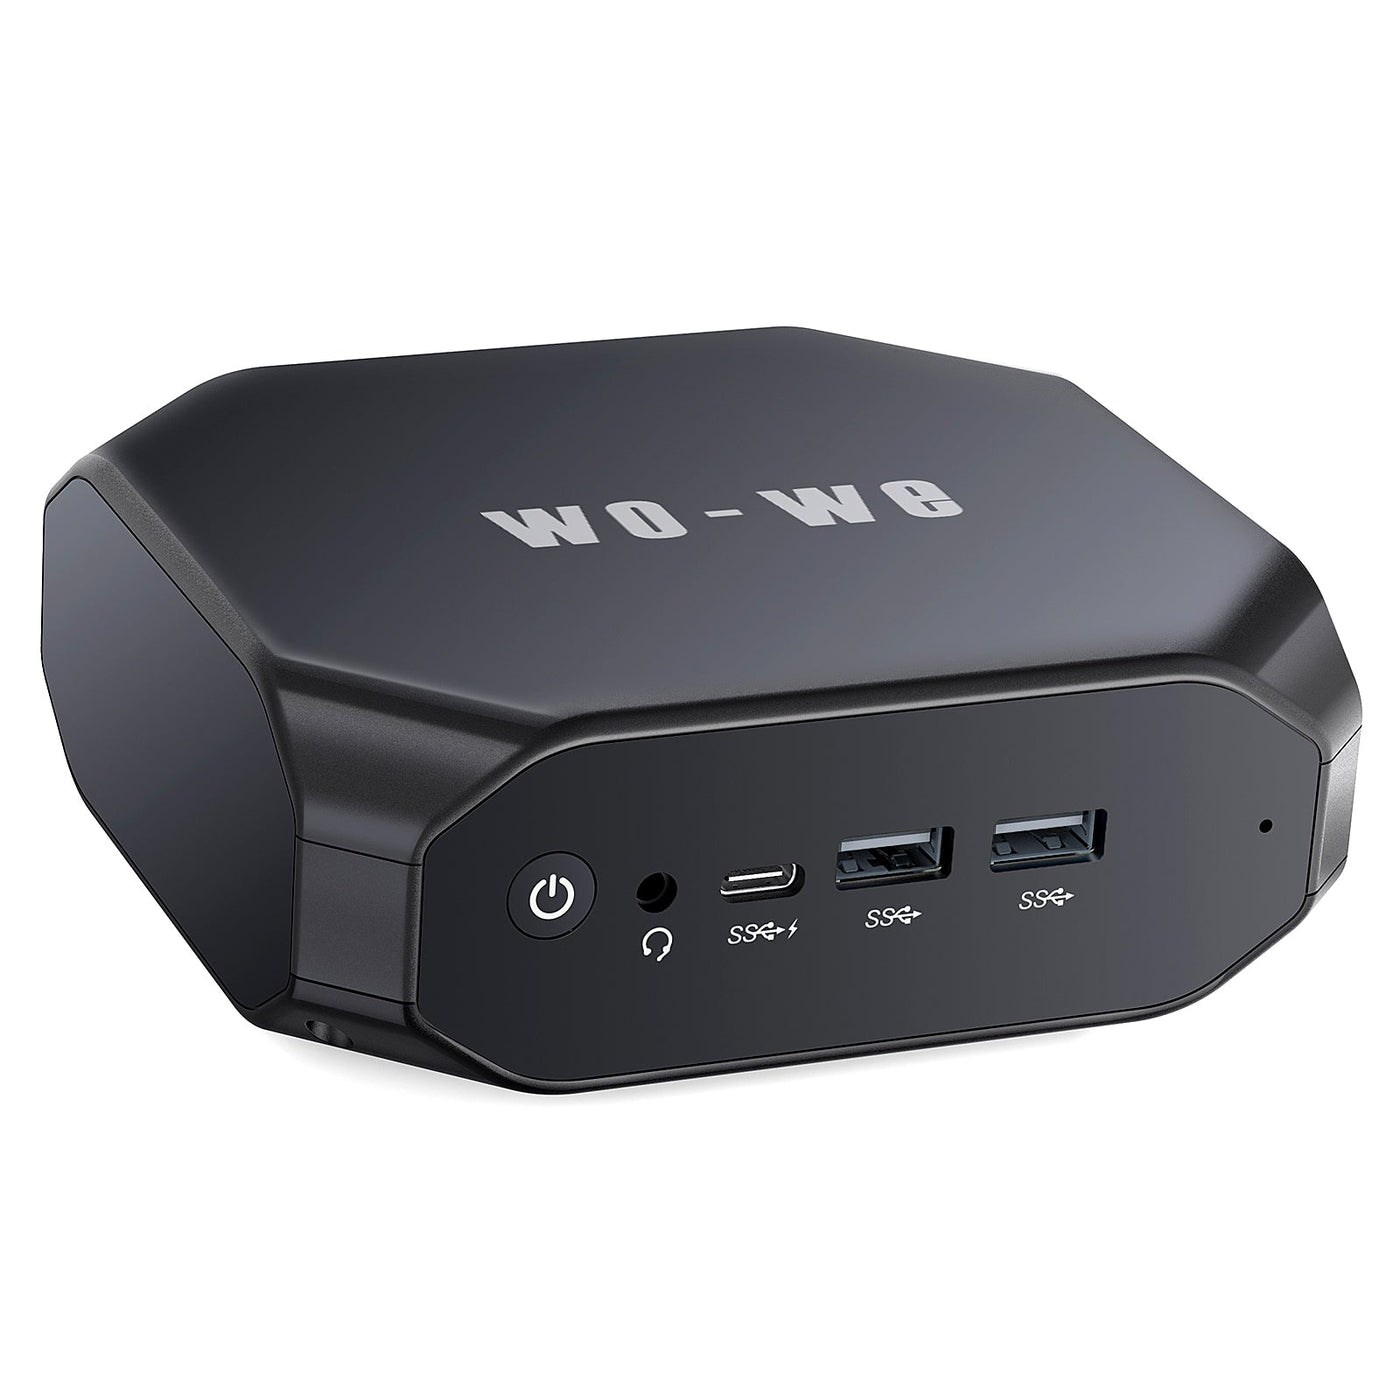 Wo-We Mini PC with AMD Excavator A9-9400 up to 3.2GHz, 8G DDR4, 128G，M.2 SATA SSD, Linux, Ubuntu-20.04.1